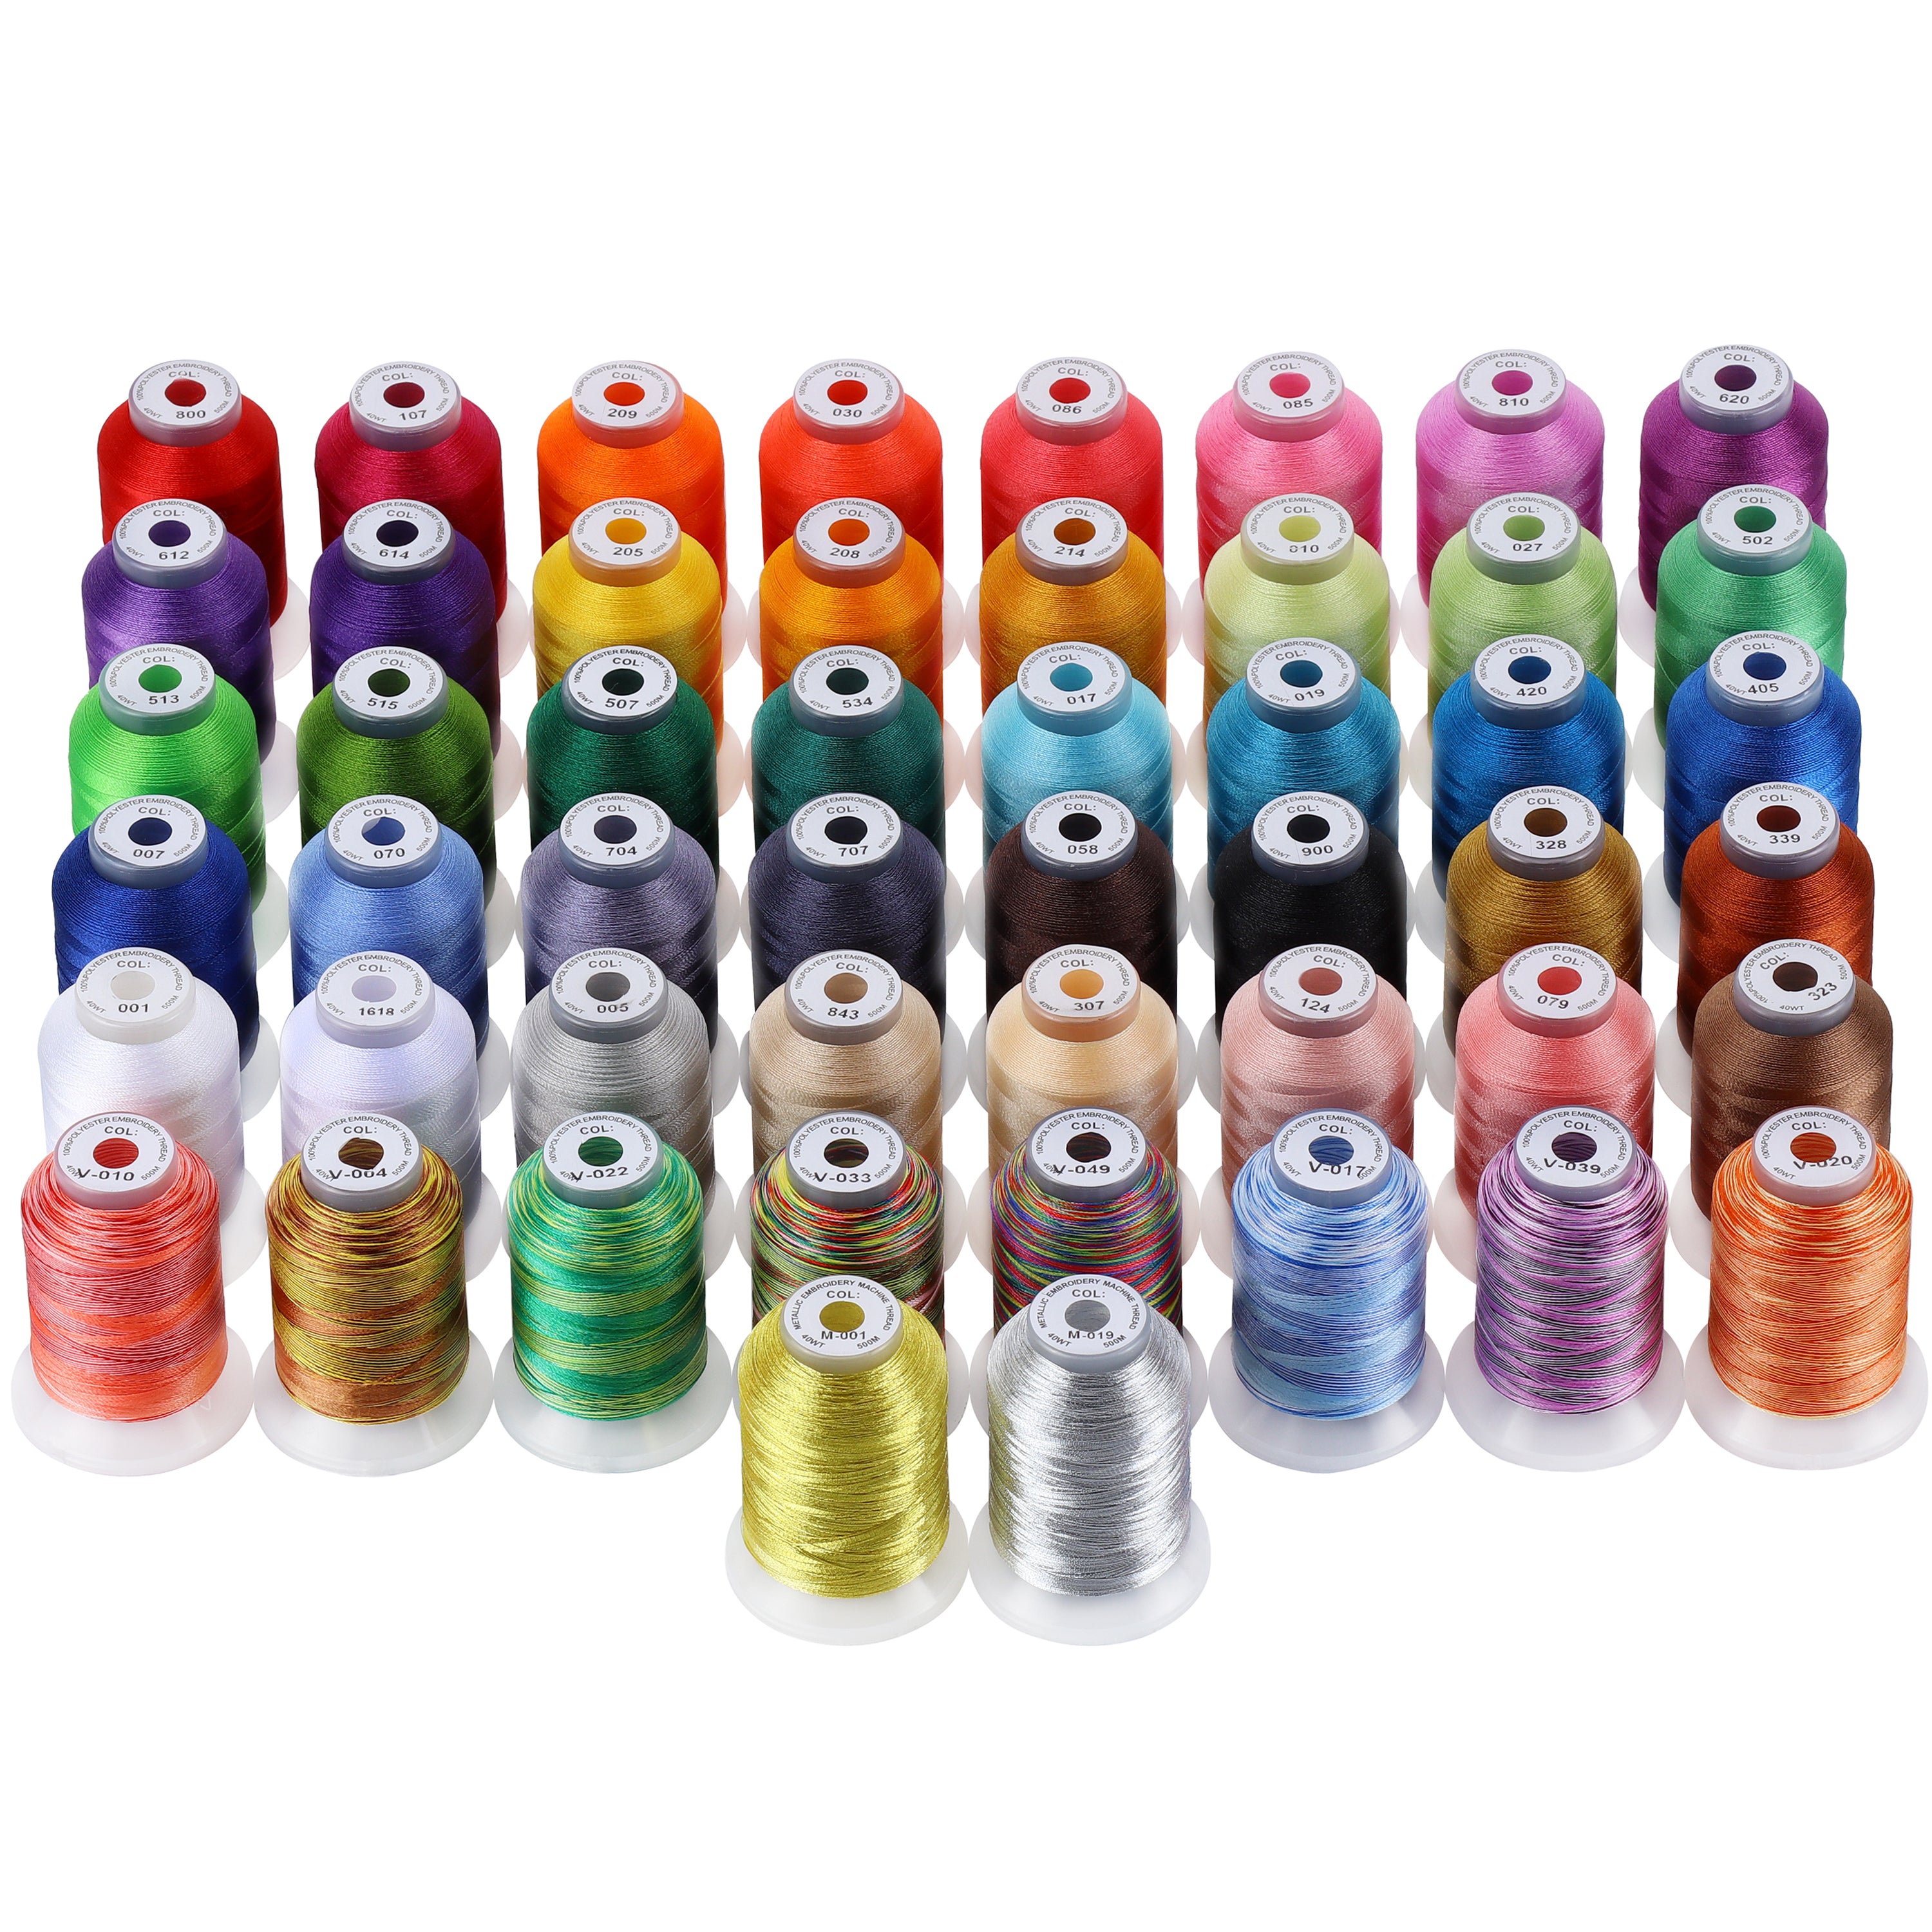 New　brothread　Brother　Including　Embroidery　Machine　40　Thread　Kit　Color